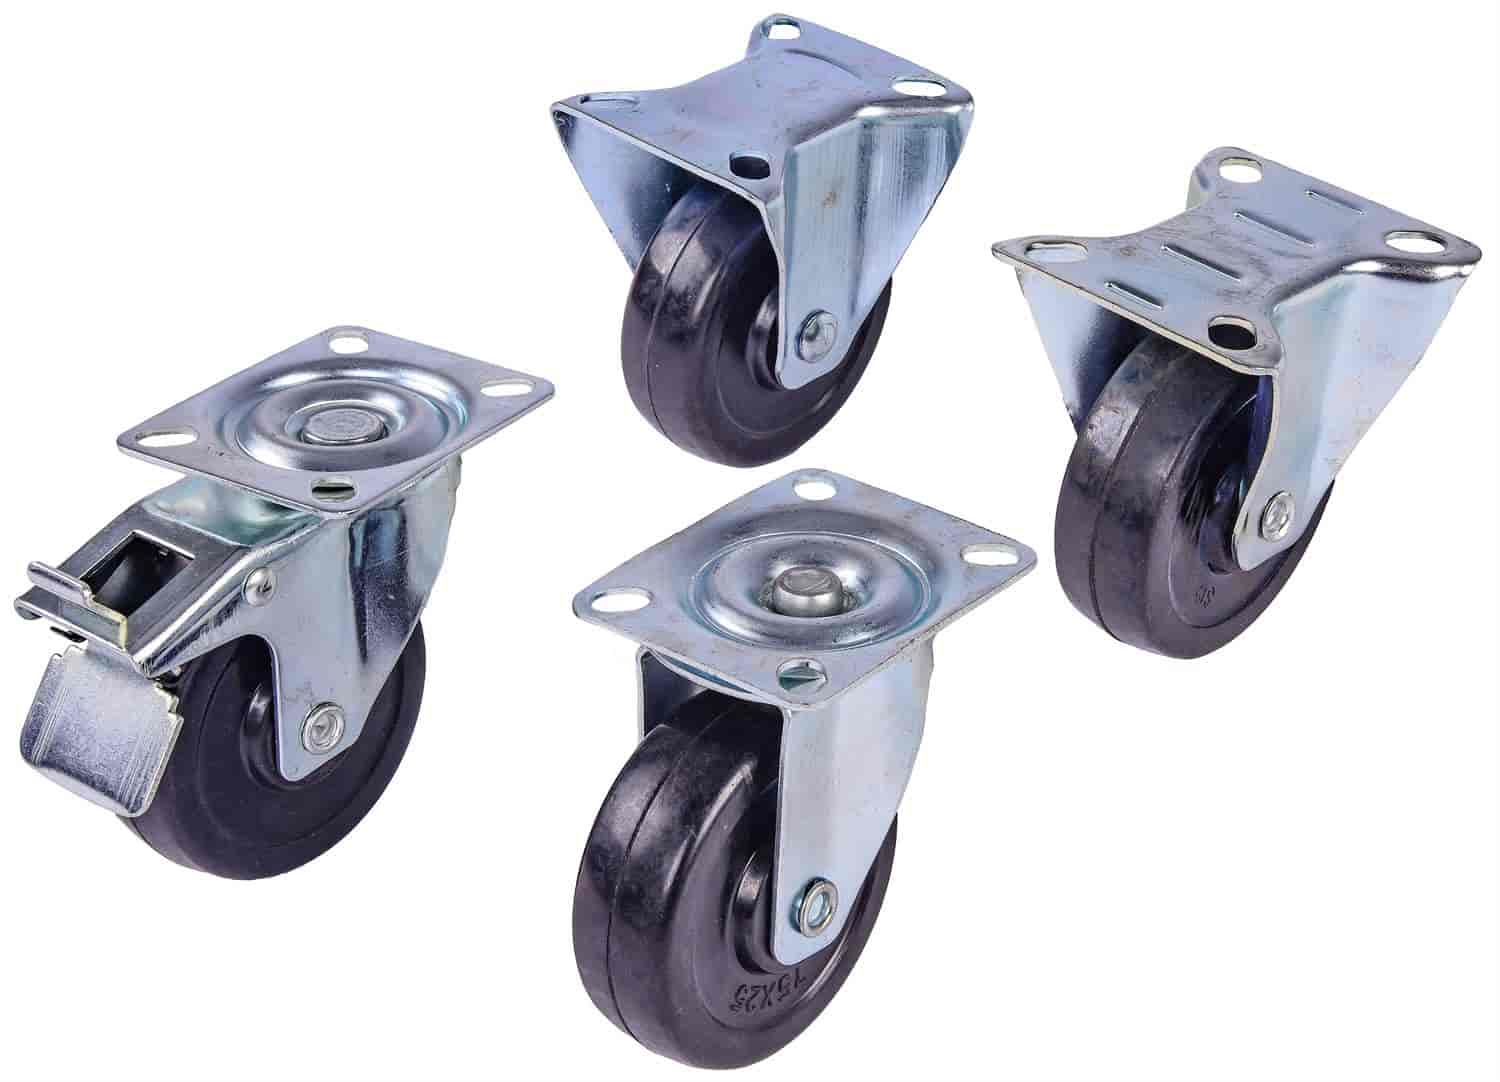 Replacement Casters for JEGS 3-Shelf Shop Cart 555-81414 [Set of 4]